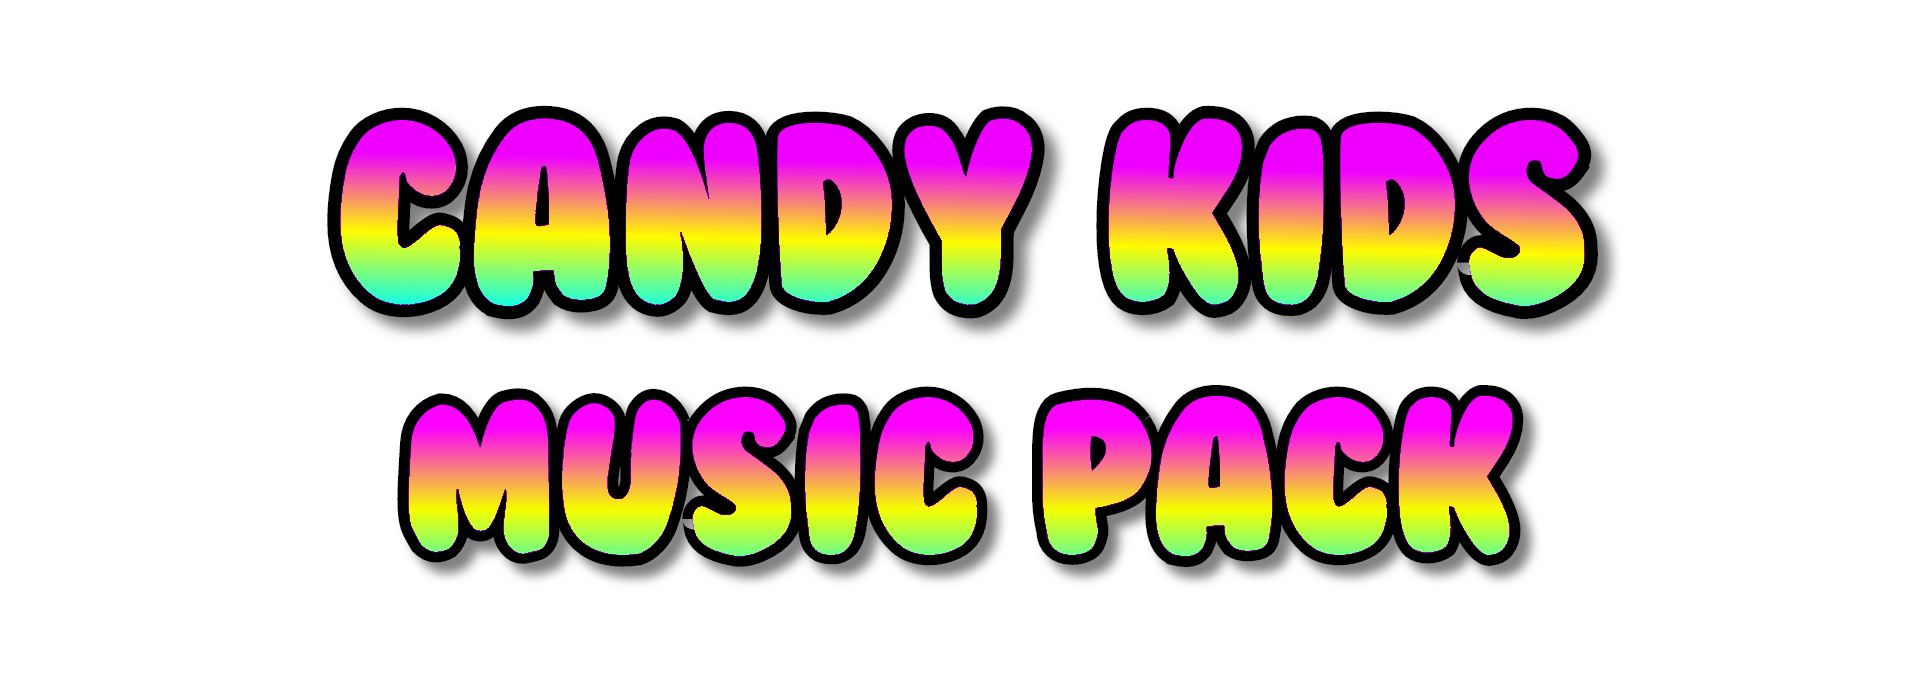 Candy Kids Music Pack